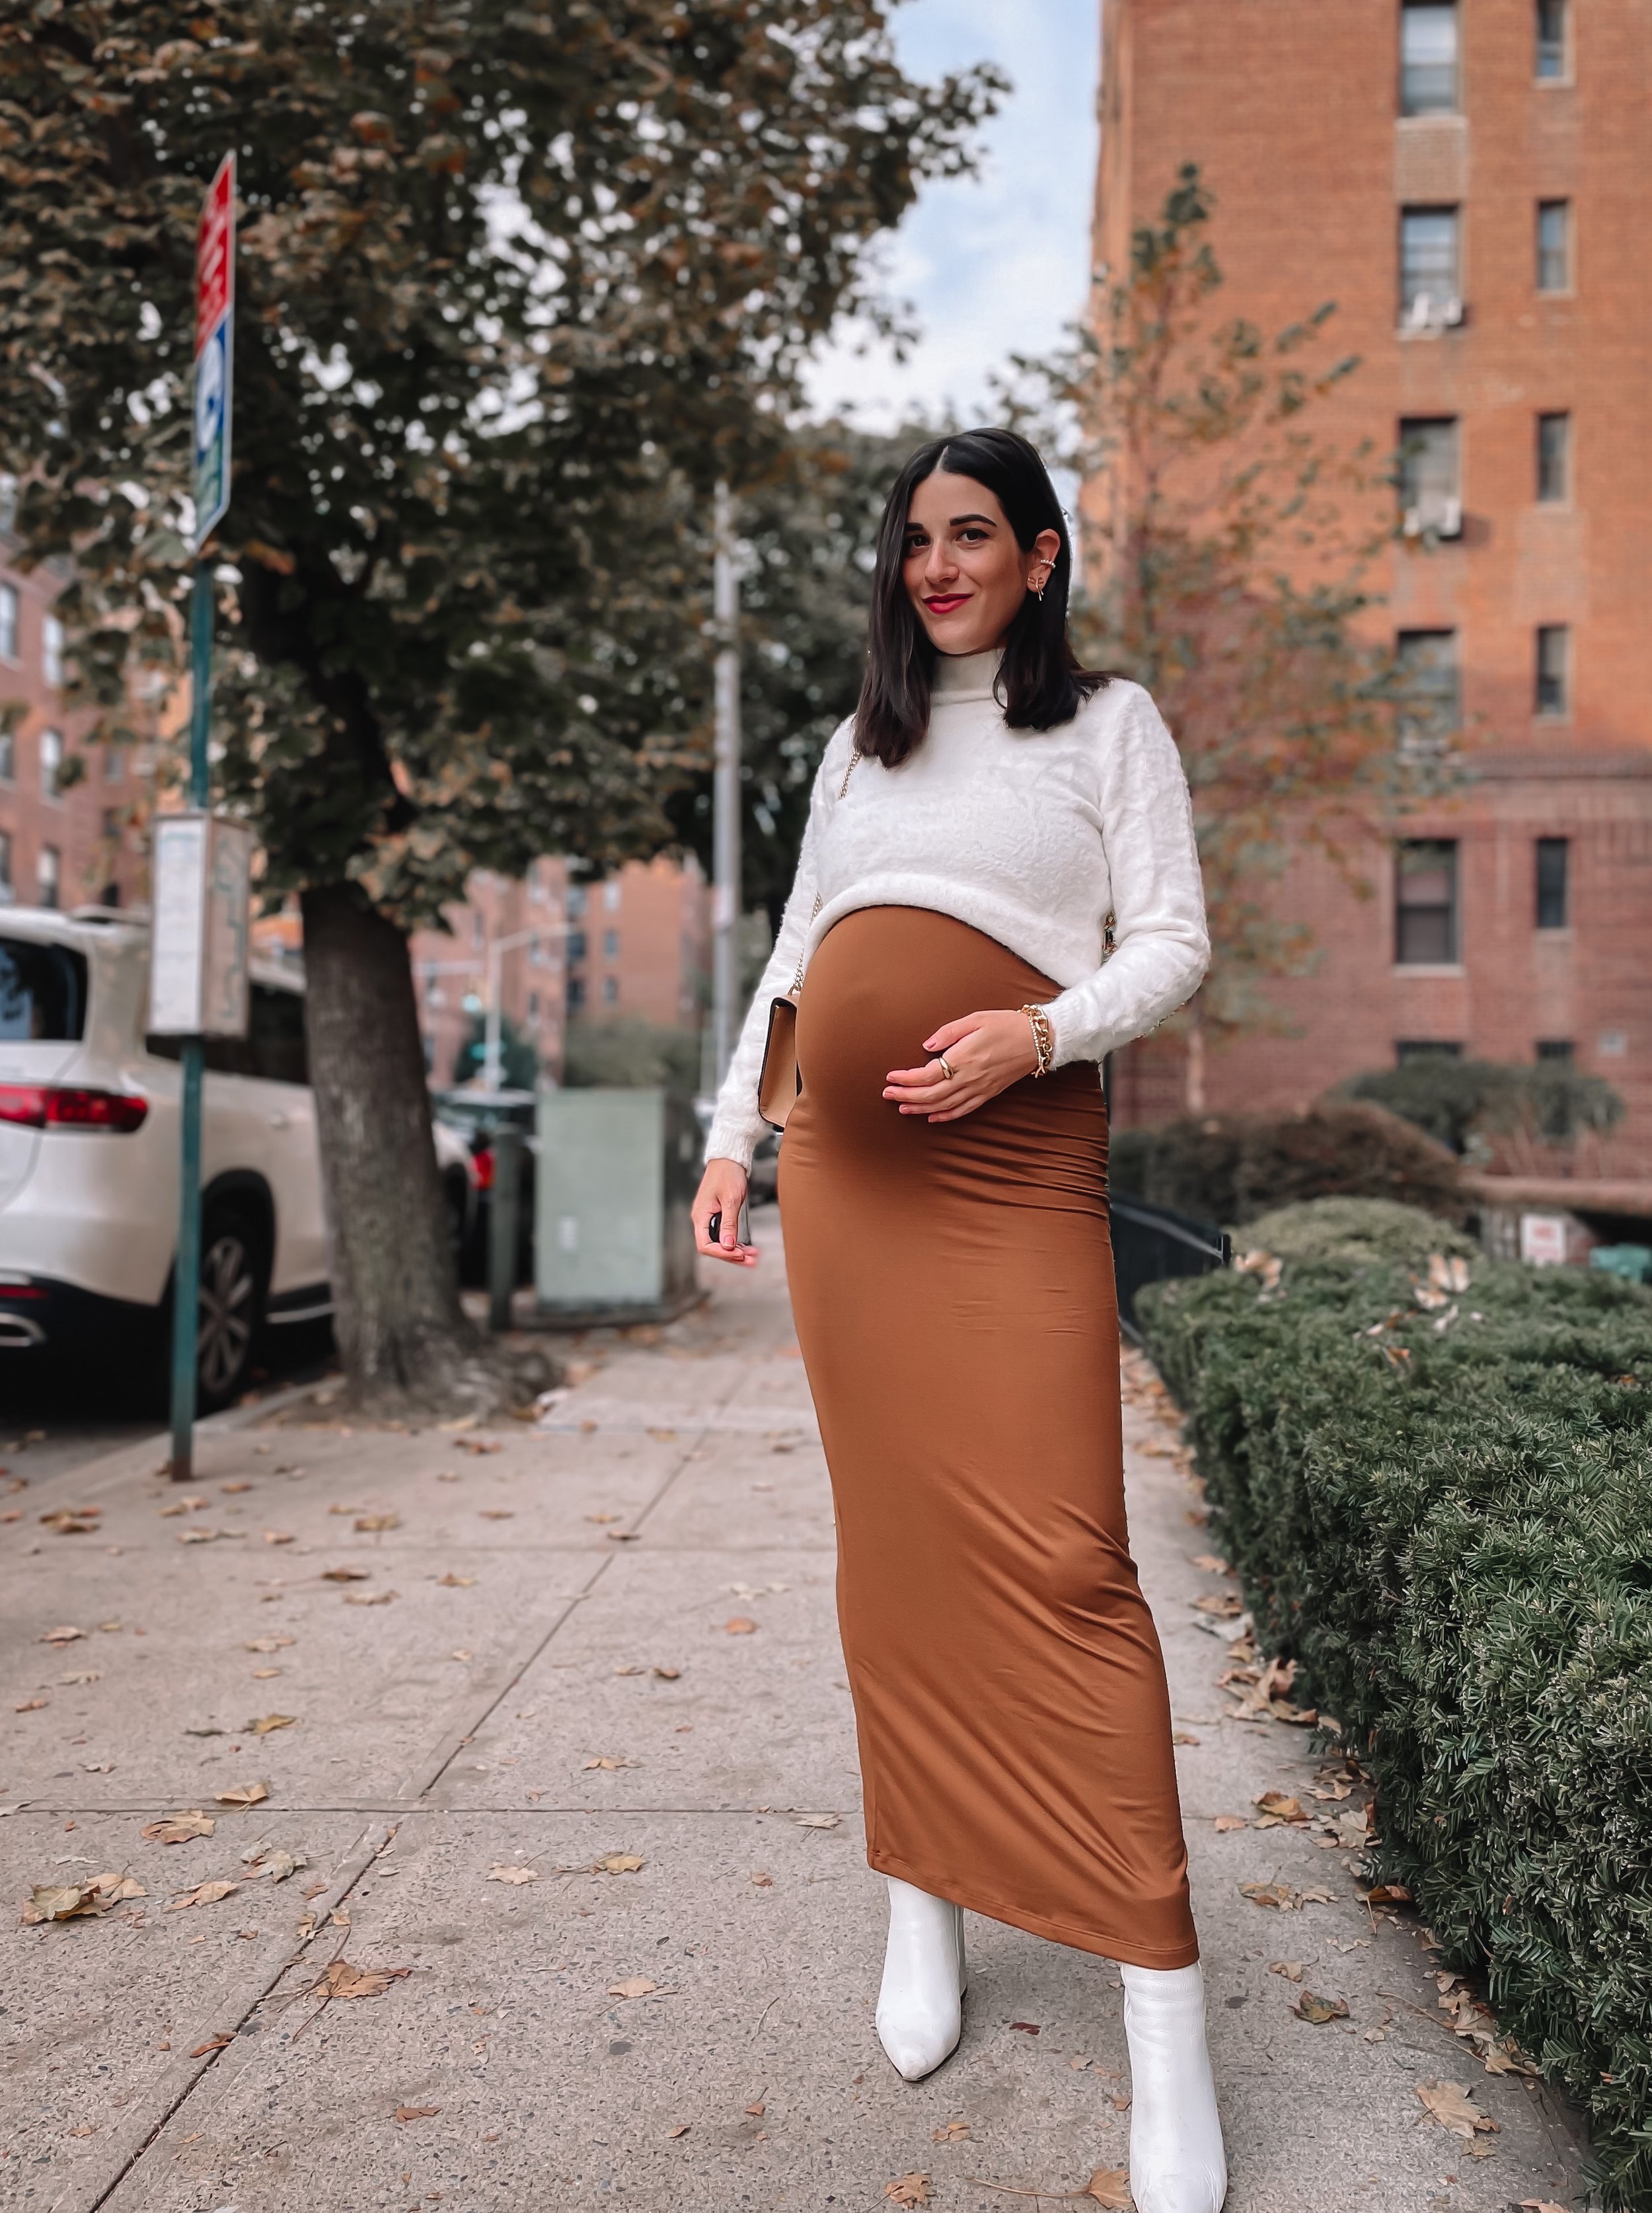 Fall Bump Styling 37 Weeks Pregnant Esther Santer NYC Street Style Blogger Bumpsuit The Jane Dress Toffee White Booties Mango Sweater What to Wear How To Style Bumpdate Women Girl OOTD Belly Tripod Photoshoot Due Date Epecting First Time Mom Maternity.JPG